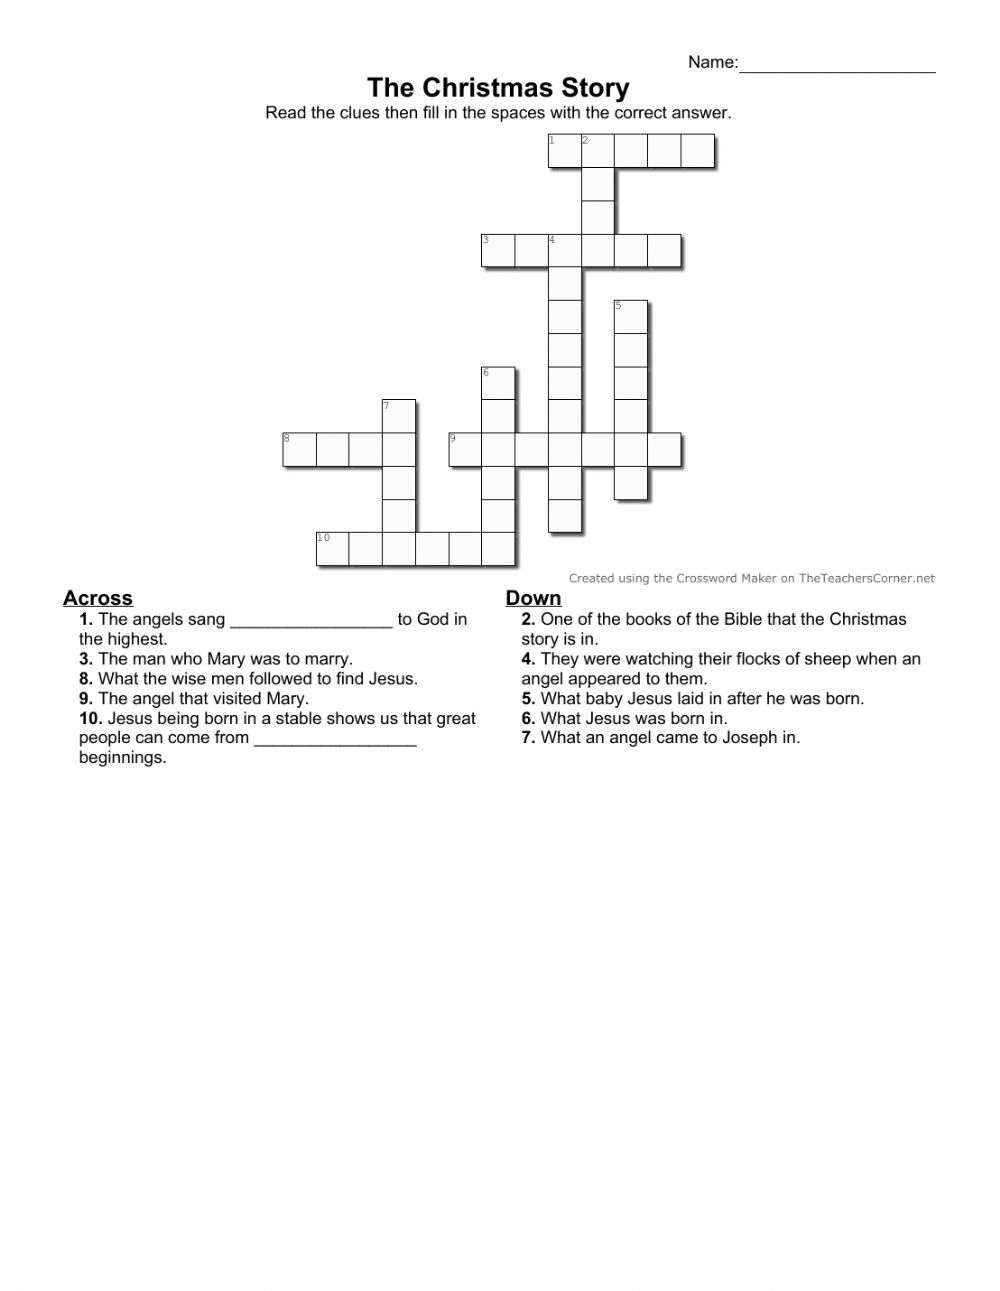 The Christmas Story Crossword Puzzle Worksheet